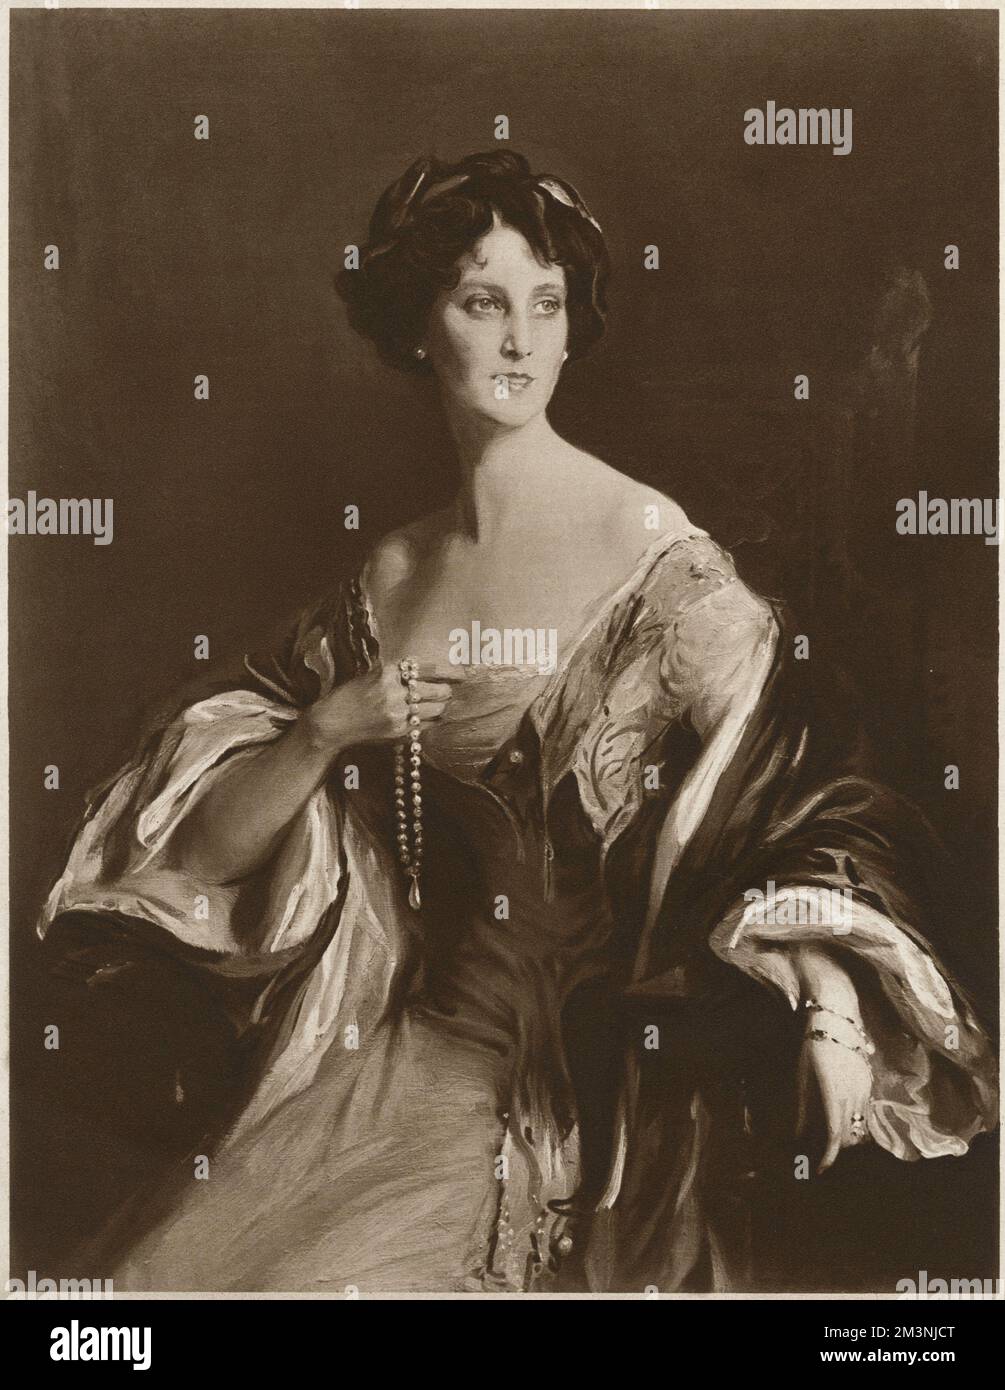 Winifred Cavendish-Bentinck(1863-1954) Duchess of Portland, D.B.E, shown here in 1913. The Illustrated London News notes that 'at  the Coronation of King George and Queen Mary, her Grace was one of four duchesses who held the Pall over the Queen during the anointing.' She was also a social reformer and active member of the R.S.P.C.A.     Date: June 1913 Stock Photo